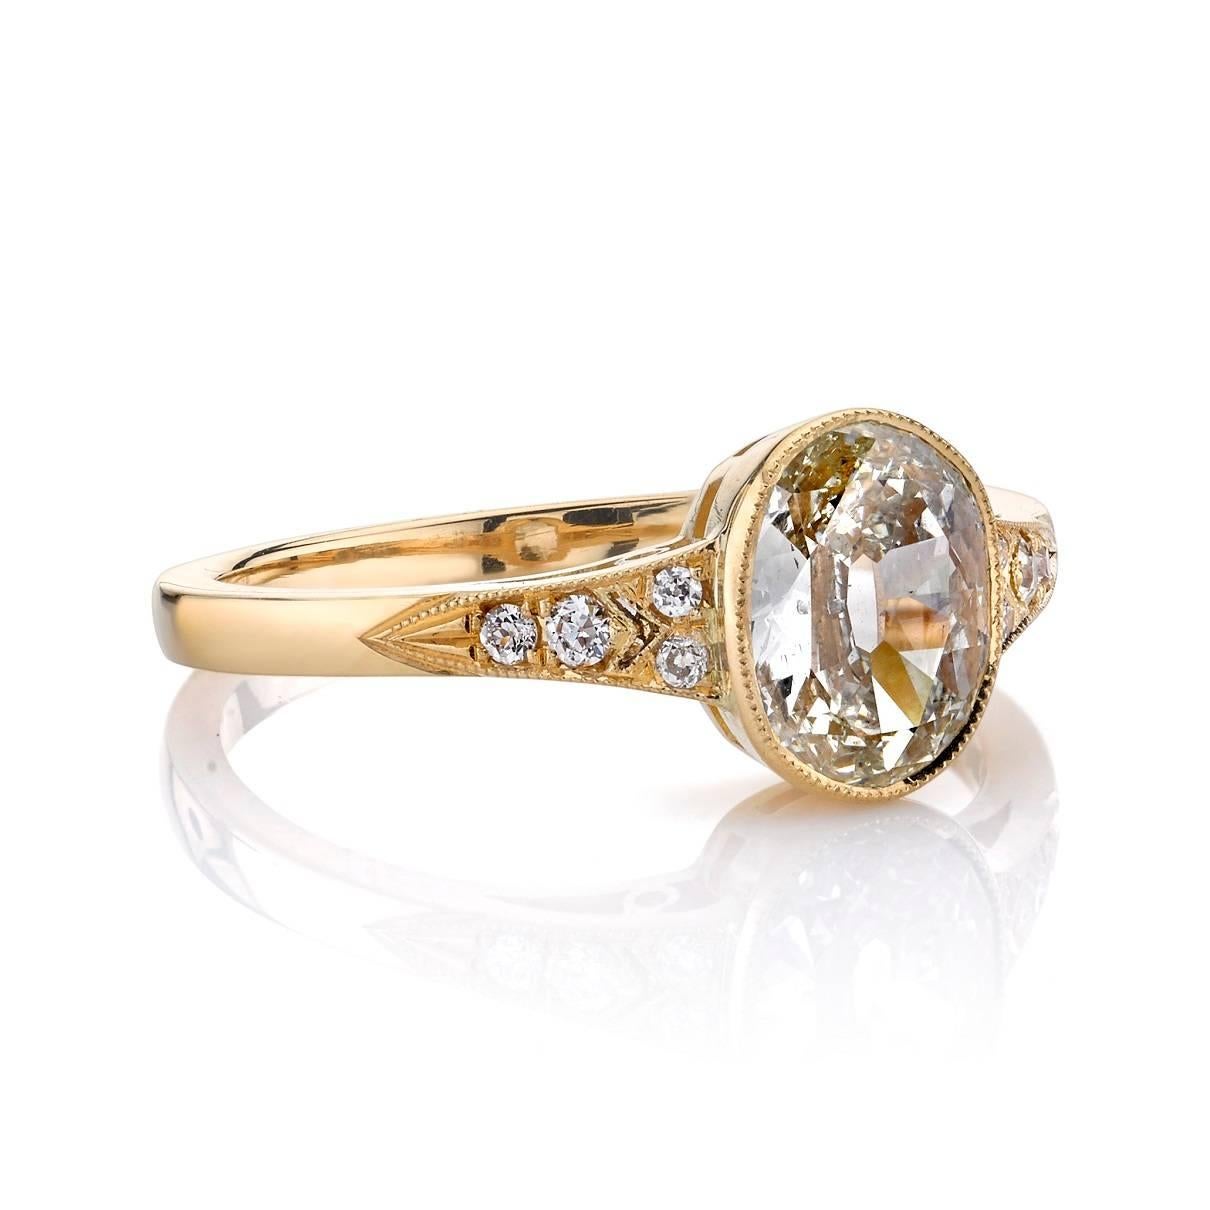 1.08ctw K-L/SI2 Oval cut diamond bezel set in a handcrafted 18k yellow gold mounting. 0.08ctw old European cut accent diamonds line both sides of the shank.

Ring is a size 6 and can be sized to fit. 